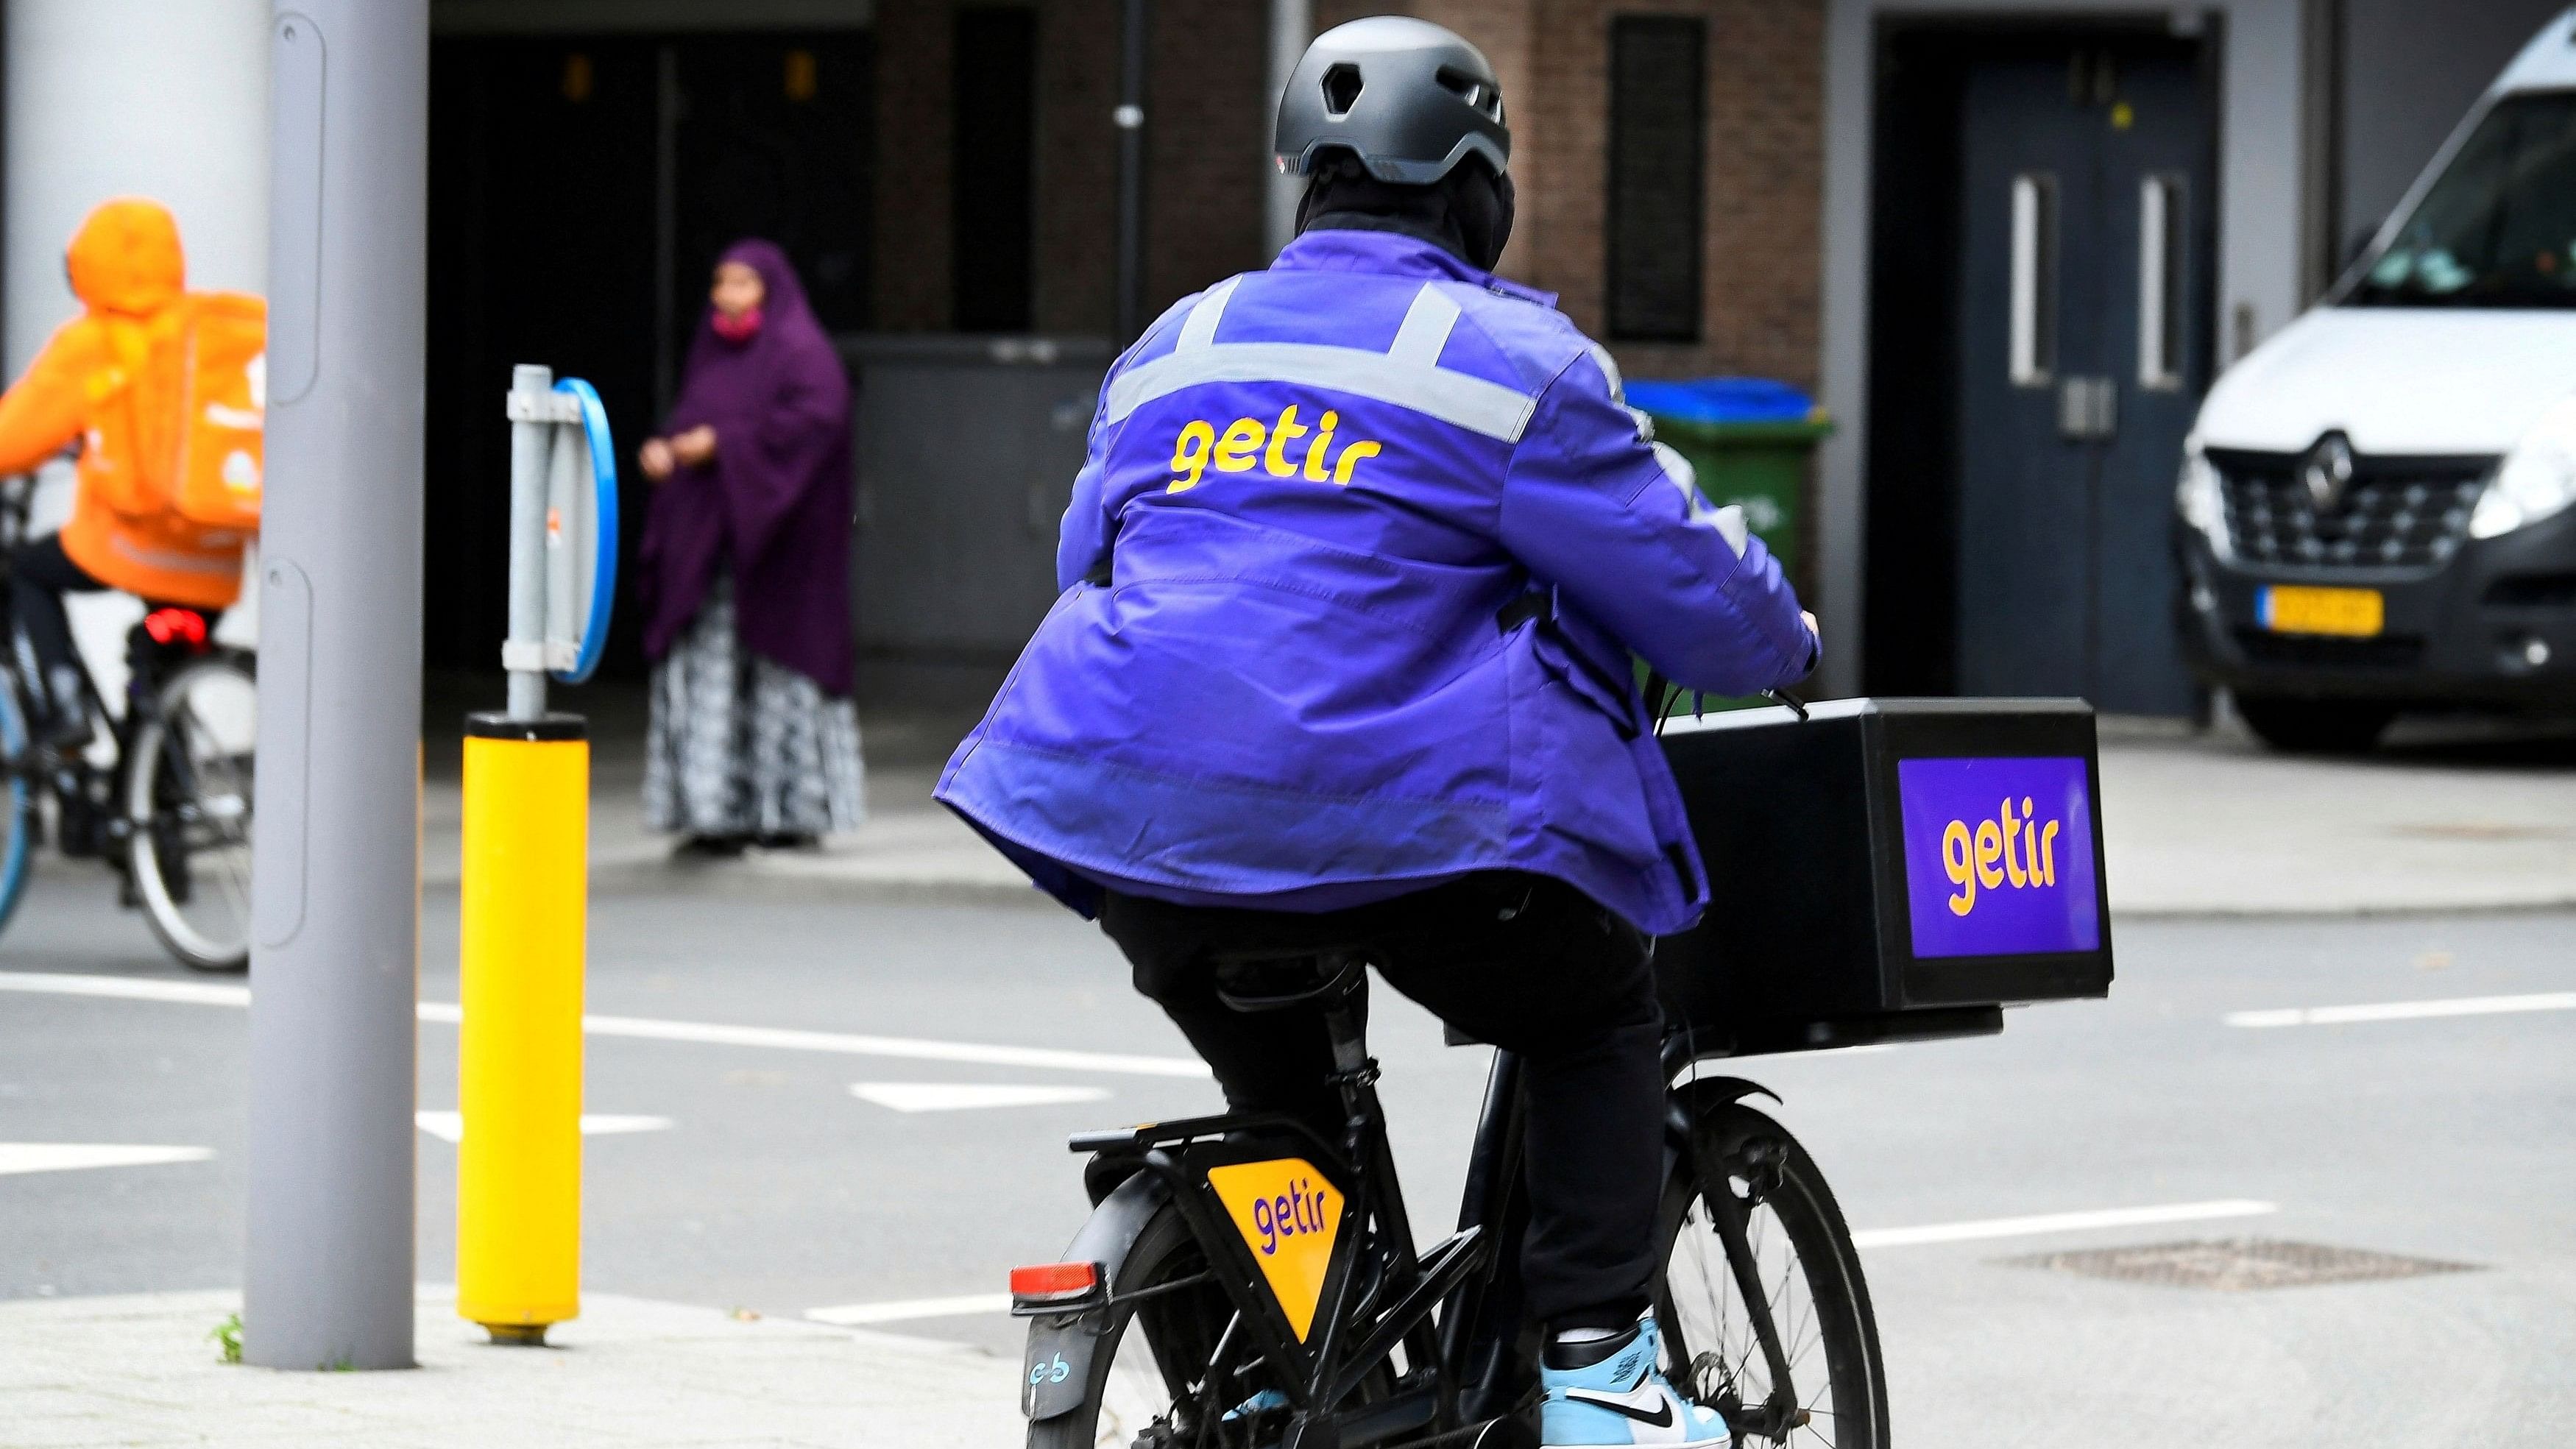 <div class="paragraphs"><p>A courier of the fast grocery deliverer Getir rides a bike in Amsterdam.</p></div>